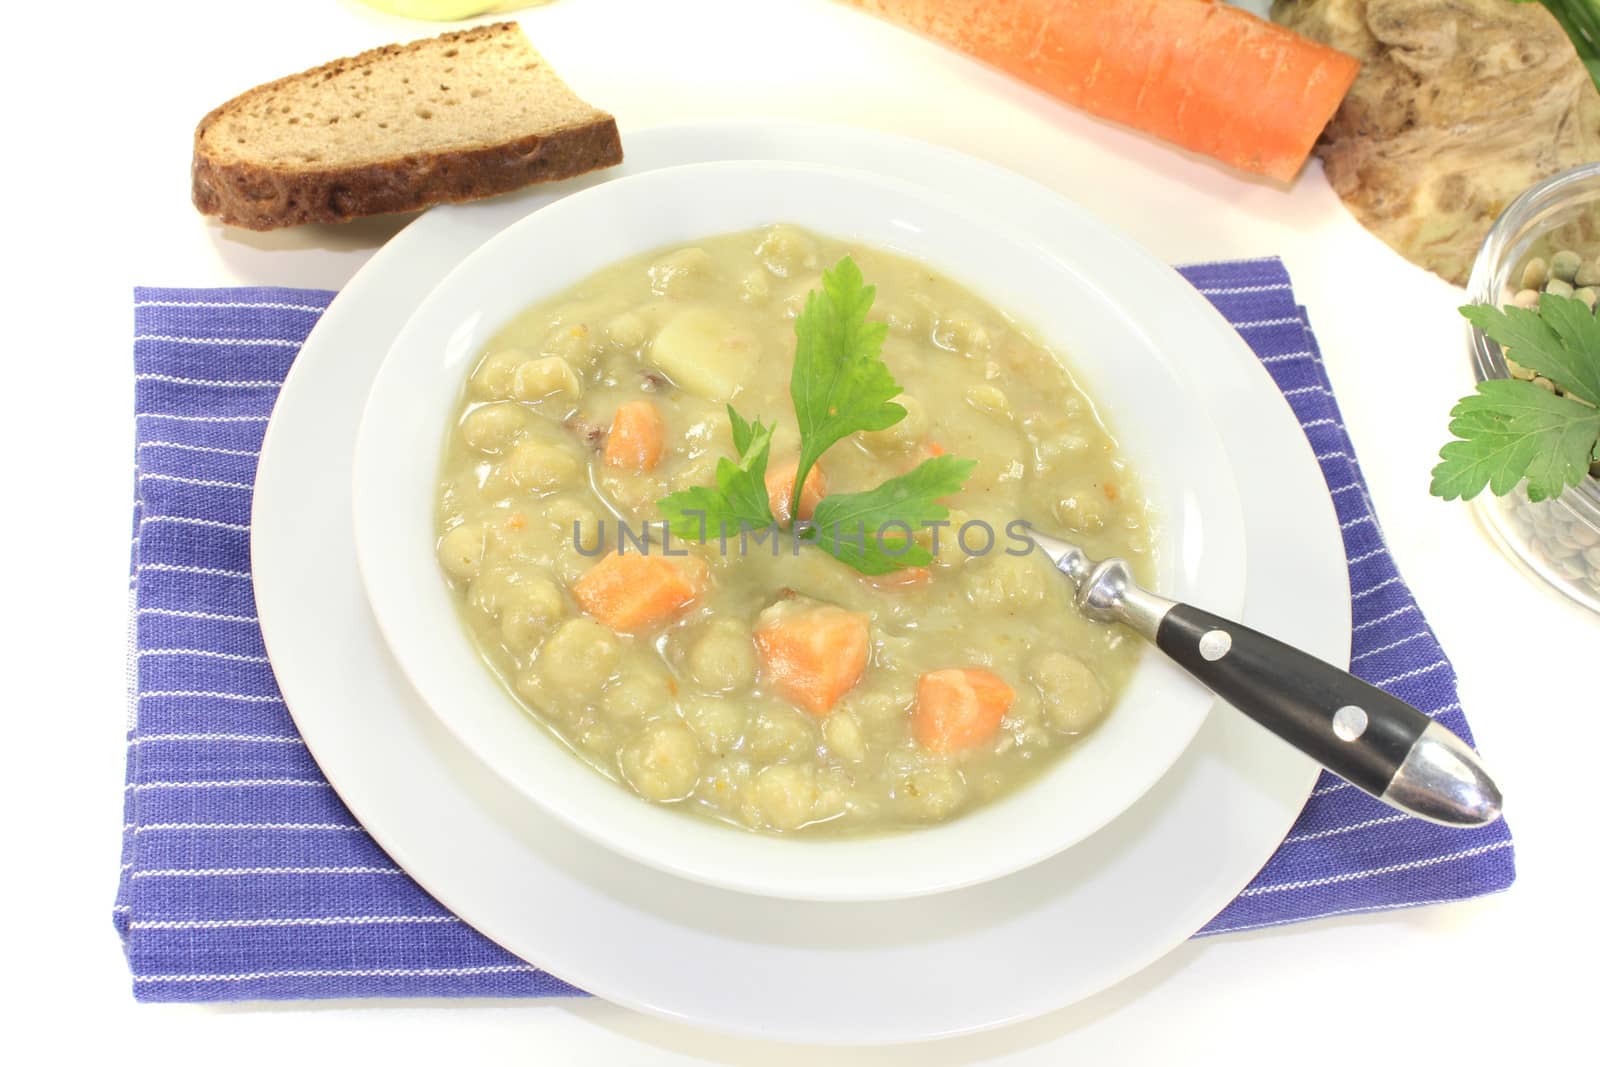 pea stew with carrots and celery on a light background